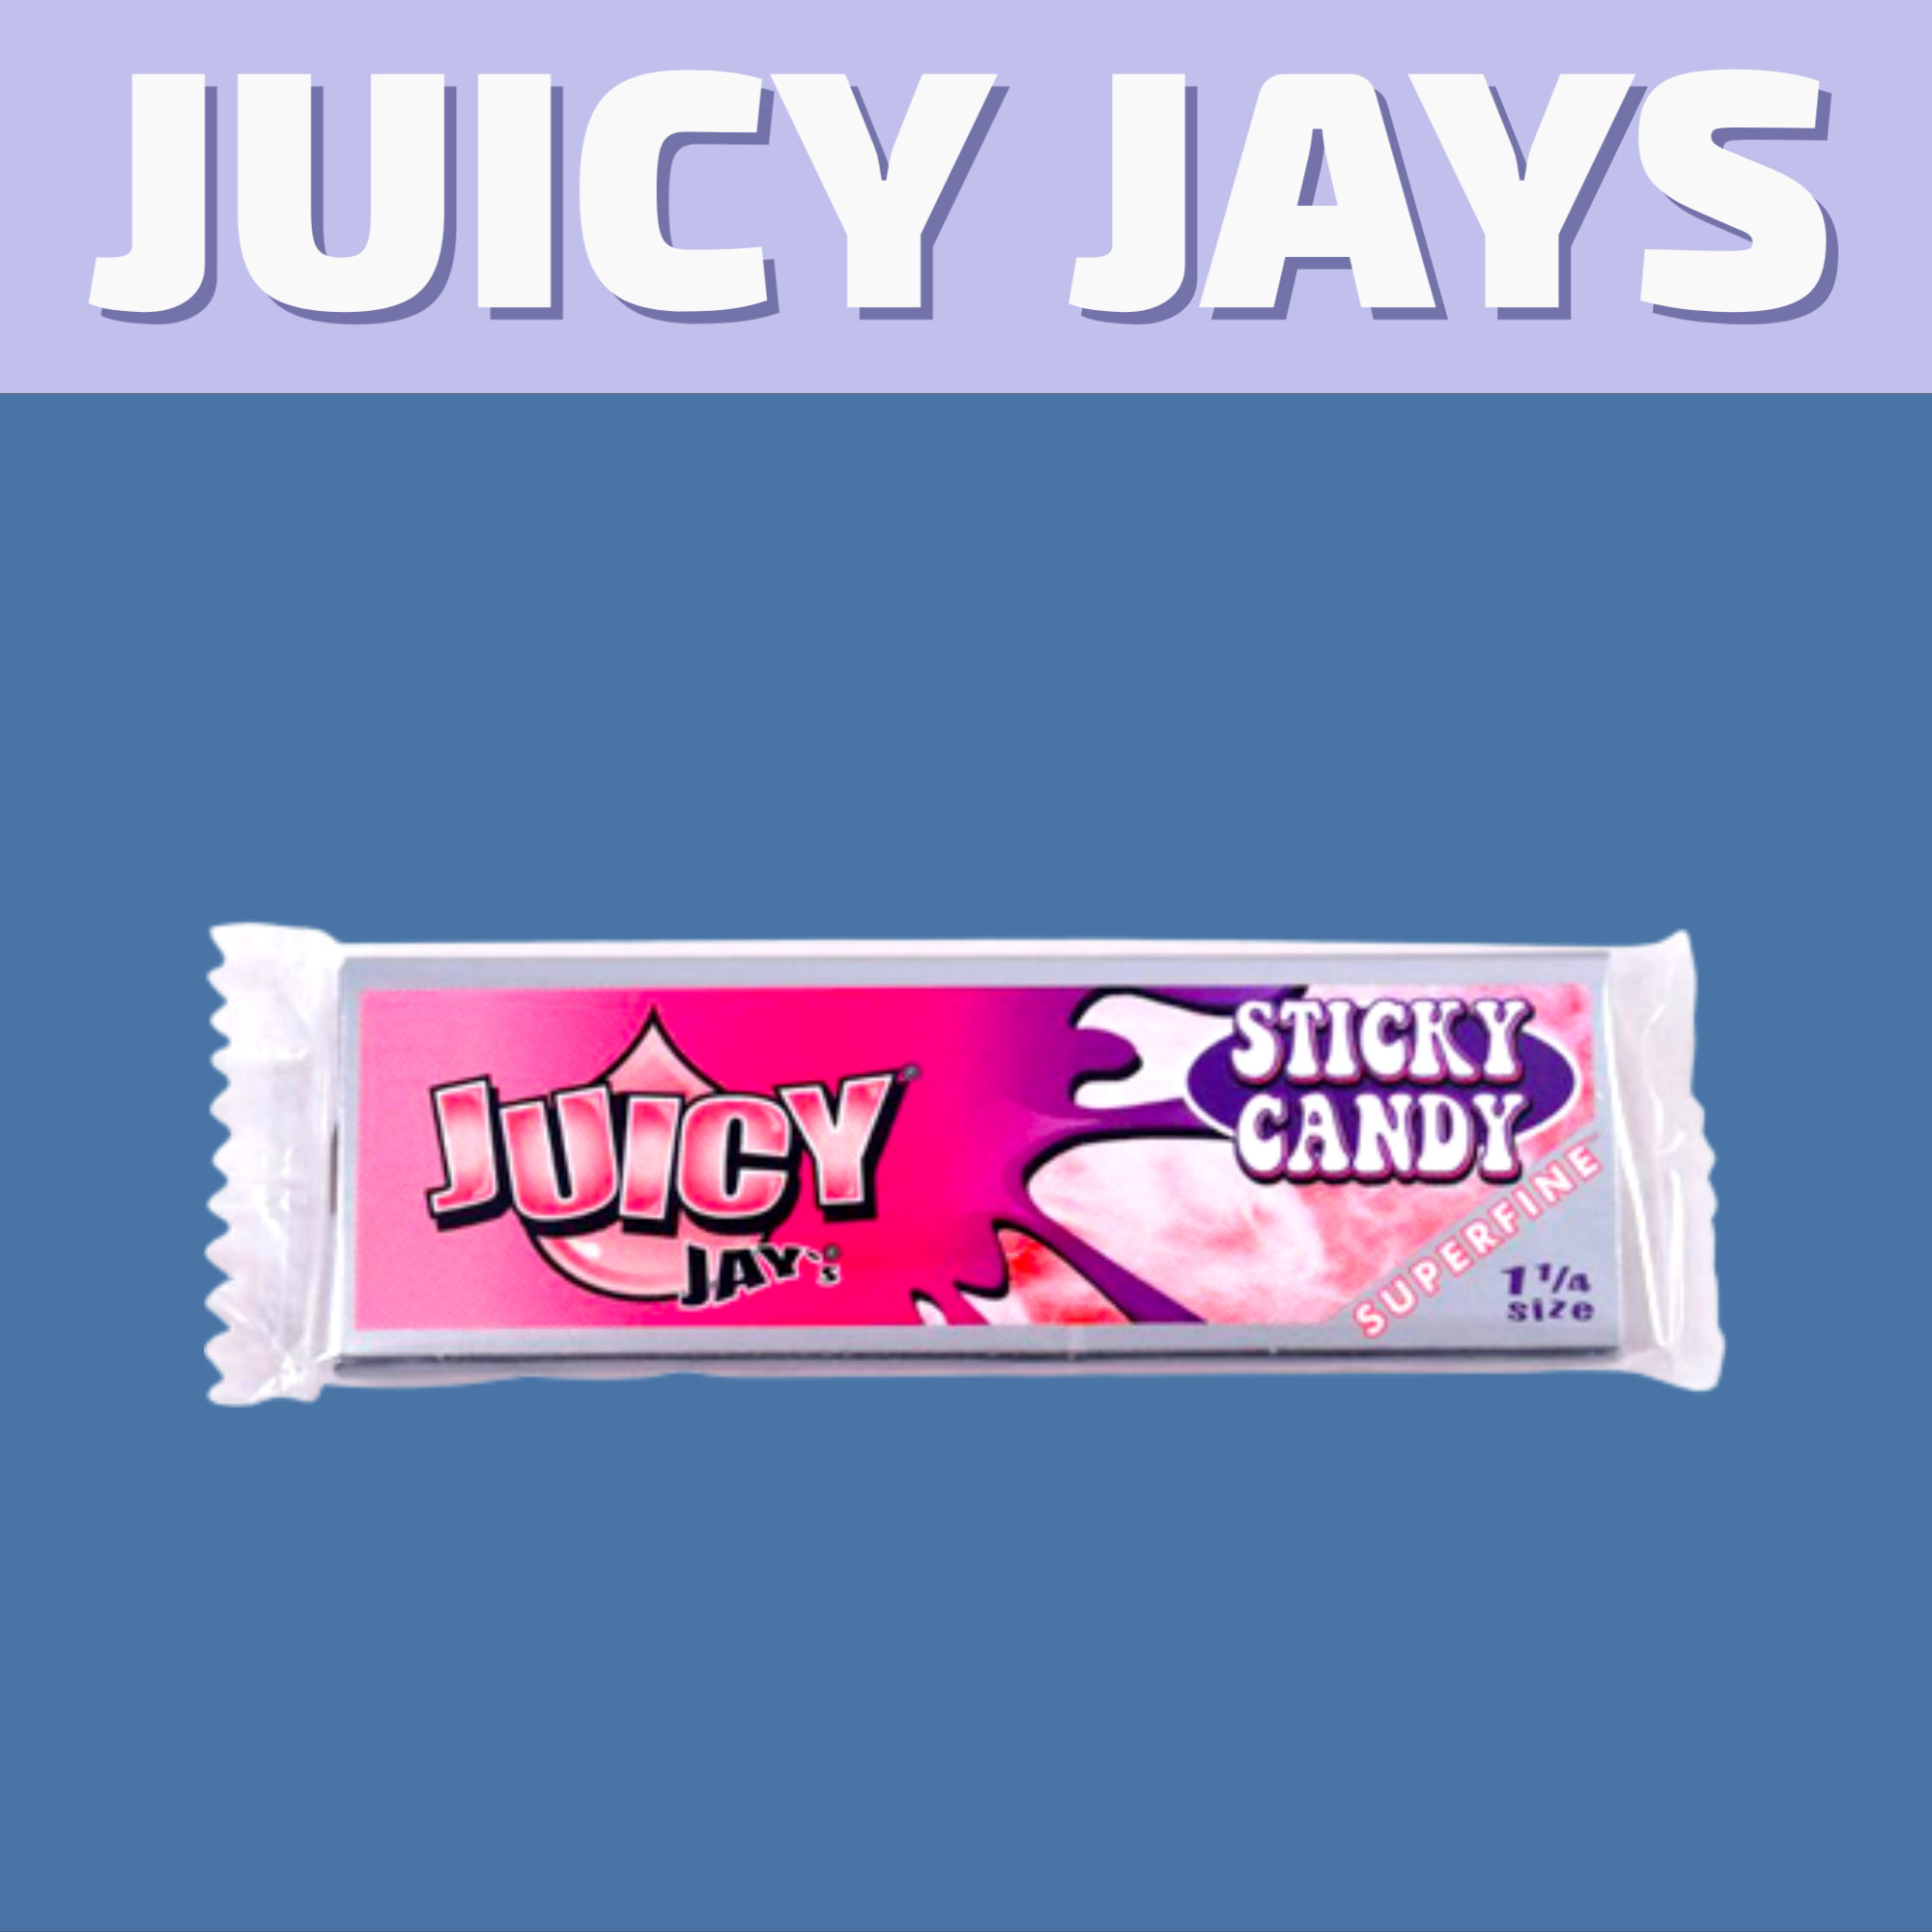 Shop our selection of Juicy Jays Flavoured Papers for same day delivery in Winnipeg or visit our cannabis store on 580 Academy Road.